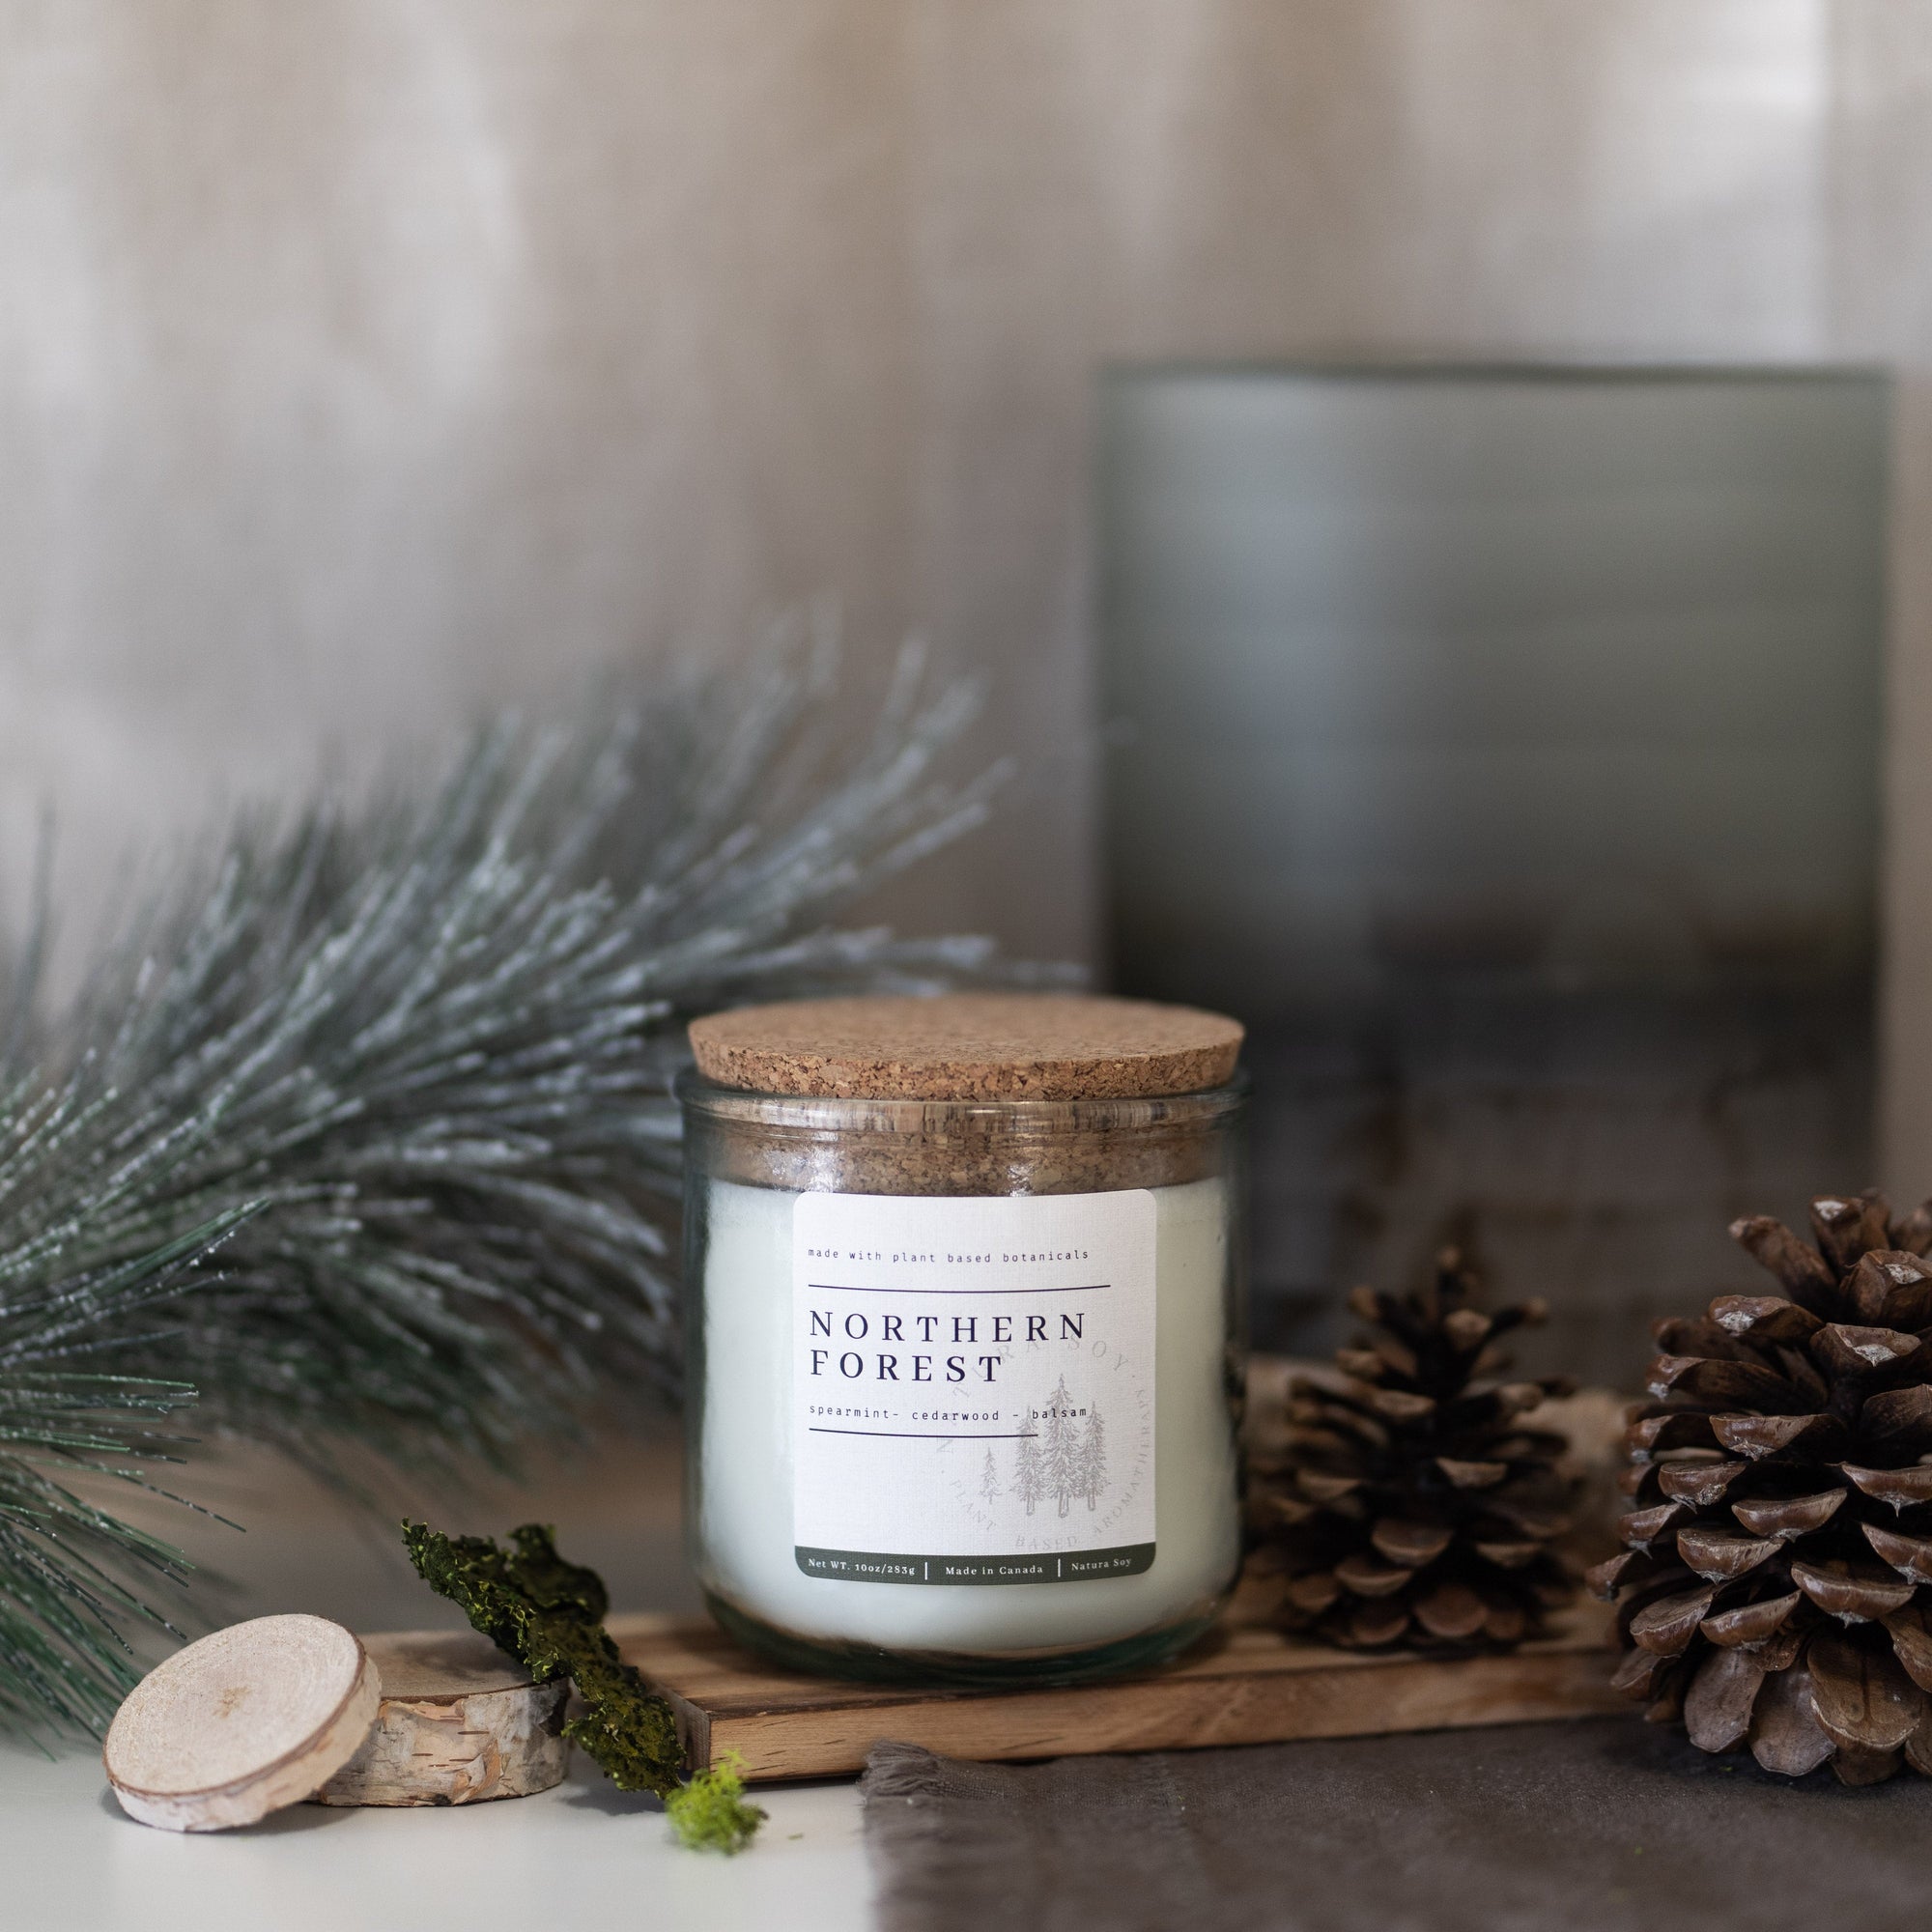 Calypso Jar Soy Candle - Northern Forest